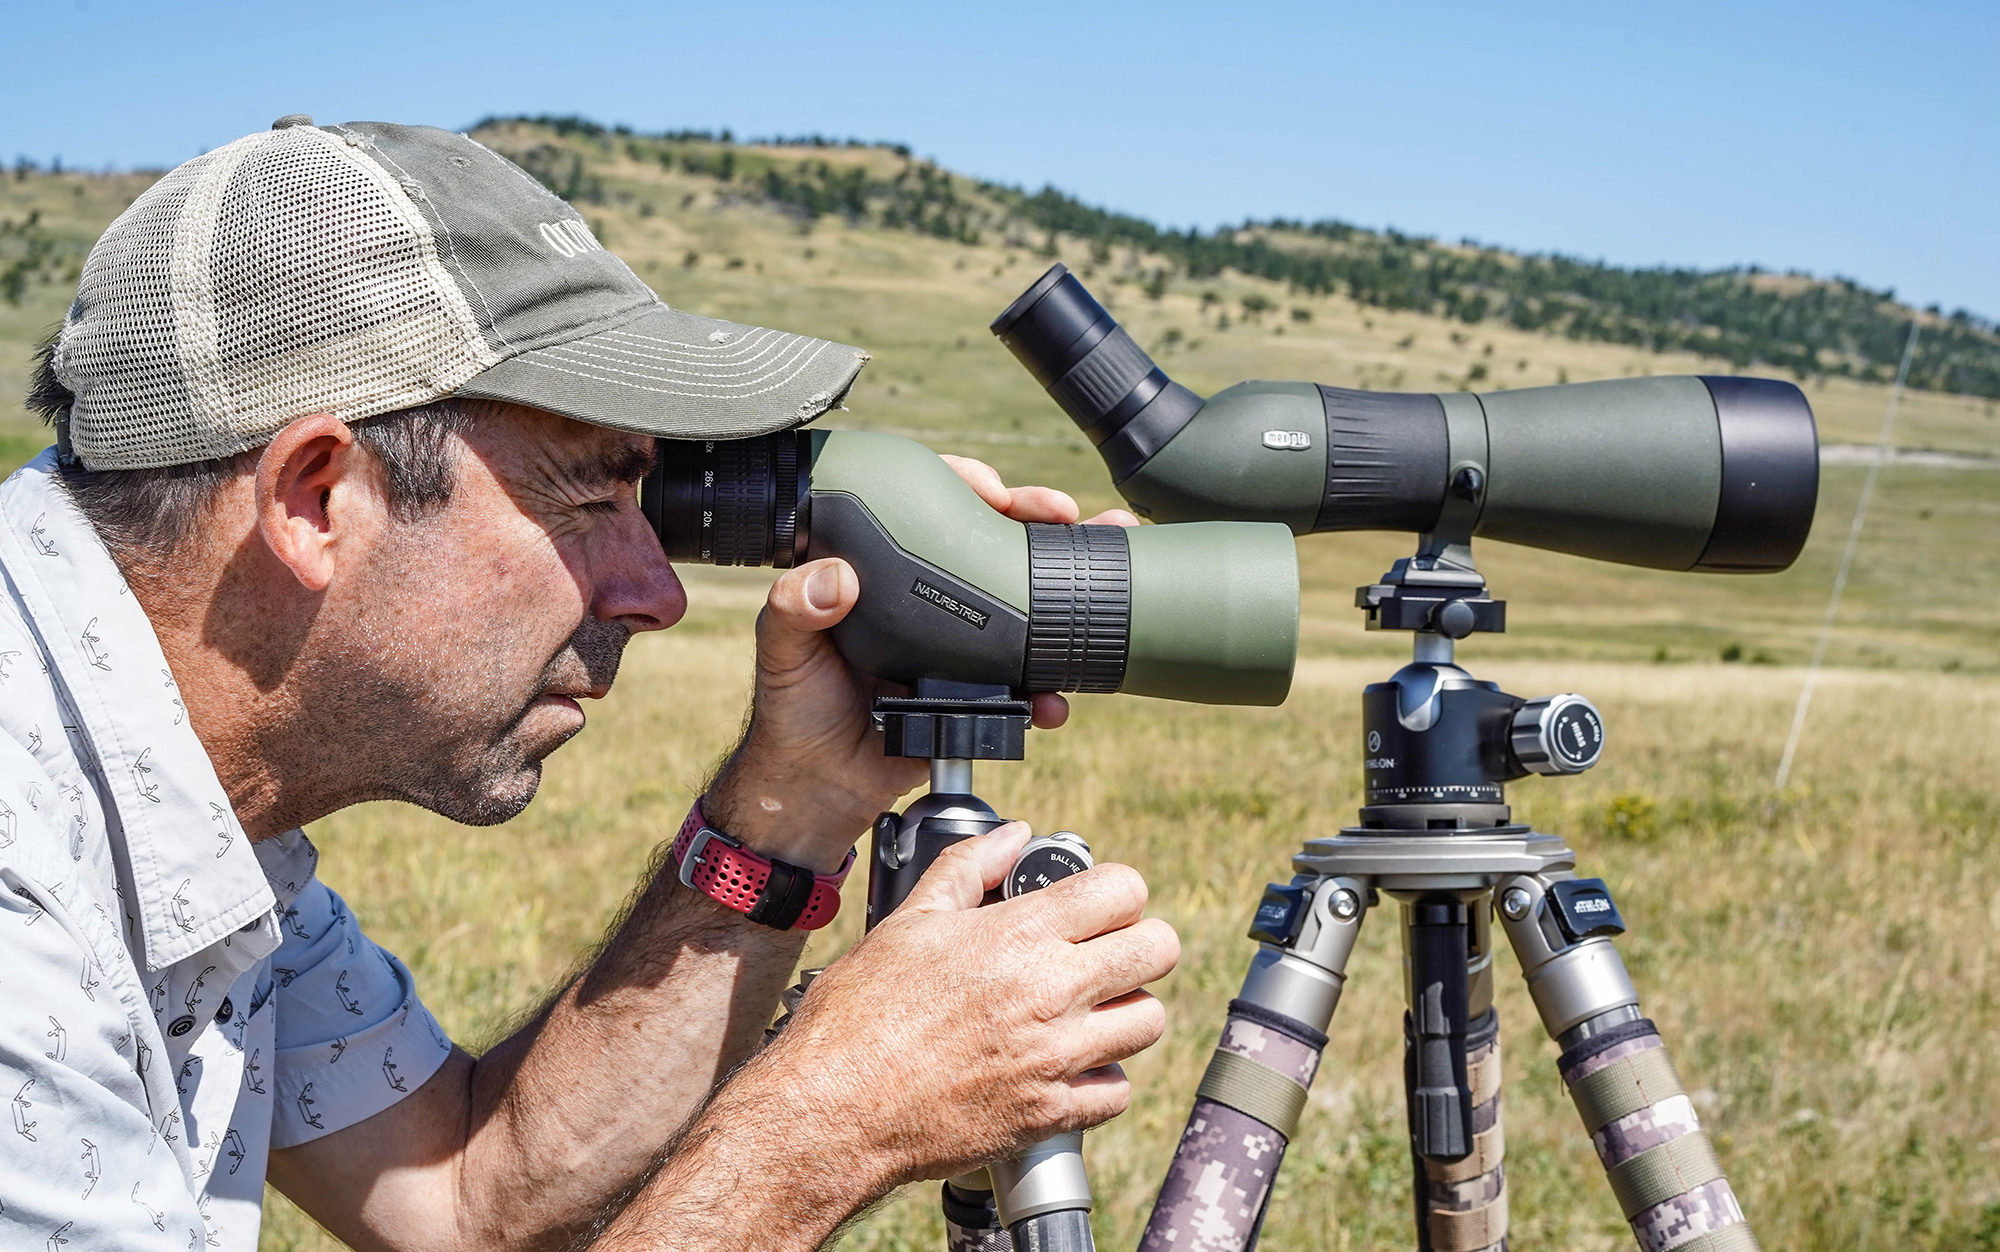 We compared full-size spotting scopes to compact versions.